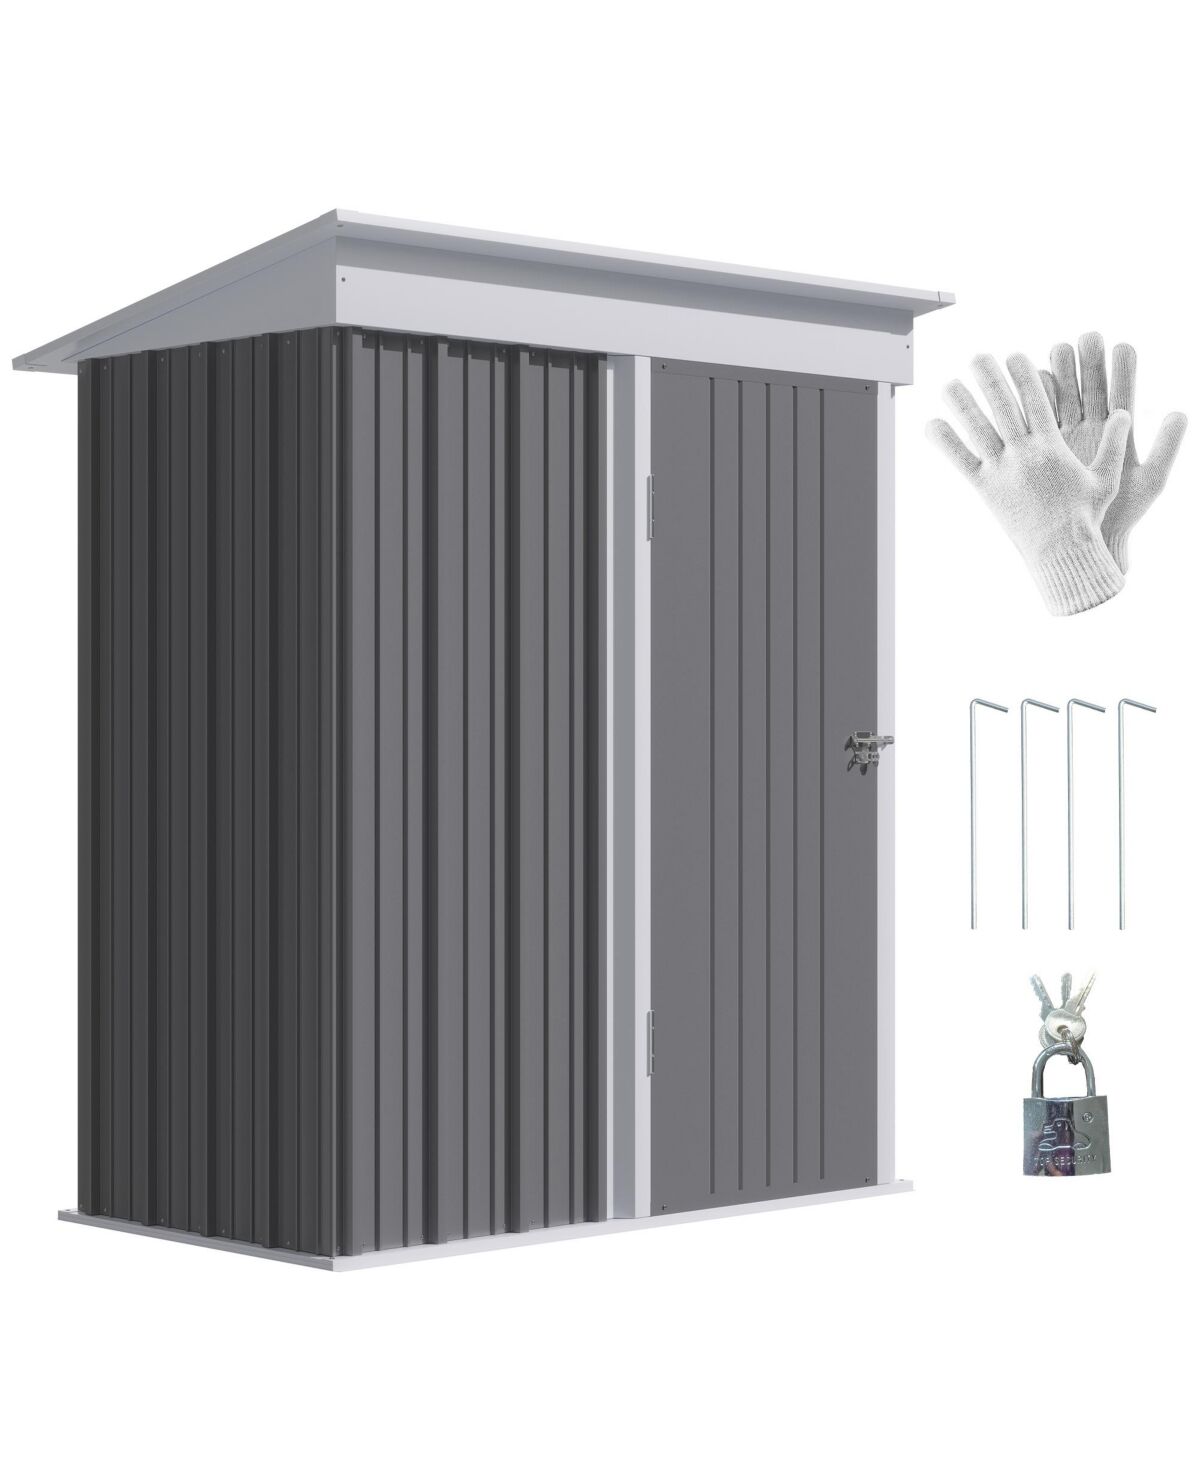 Outsunny 5' x 3' Steel Outdoor Storage Shed, Small Lean-to Shed for Garden, Tools, Tiny Metal Garage with Floor, Adjustable Shelf, Lock and Gloves for